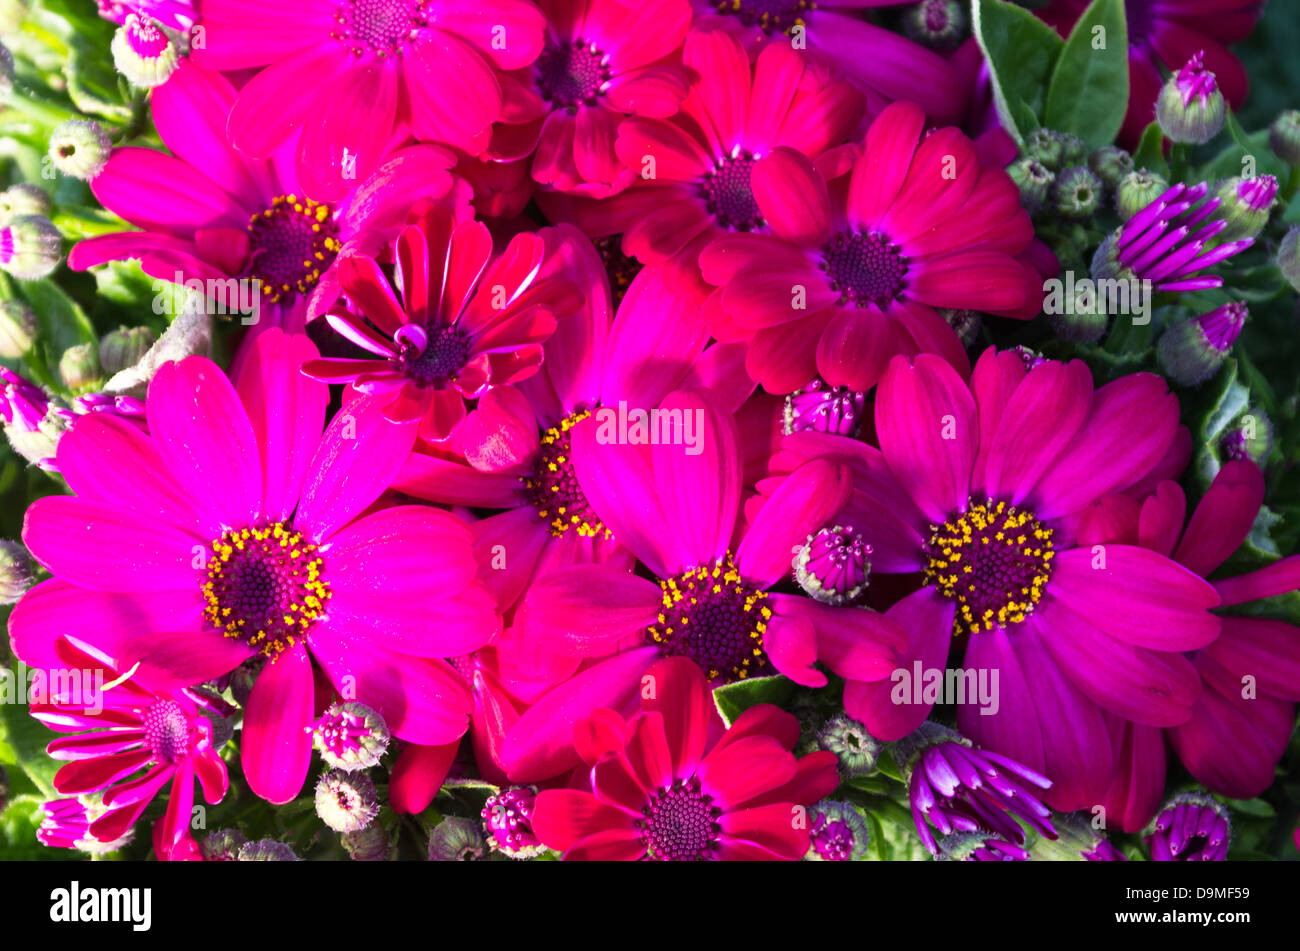 A group of colorful red cineraria maritima flowers Stock Photo